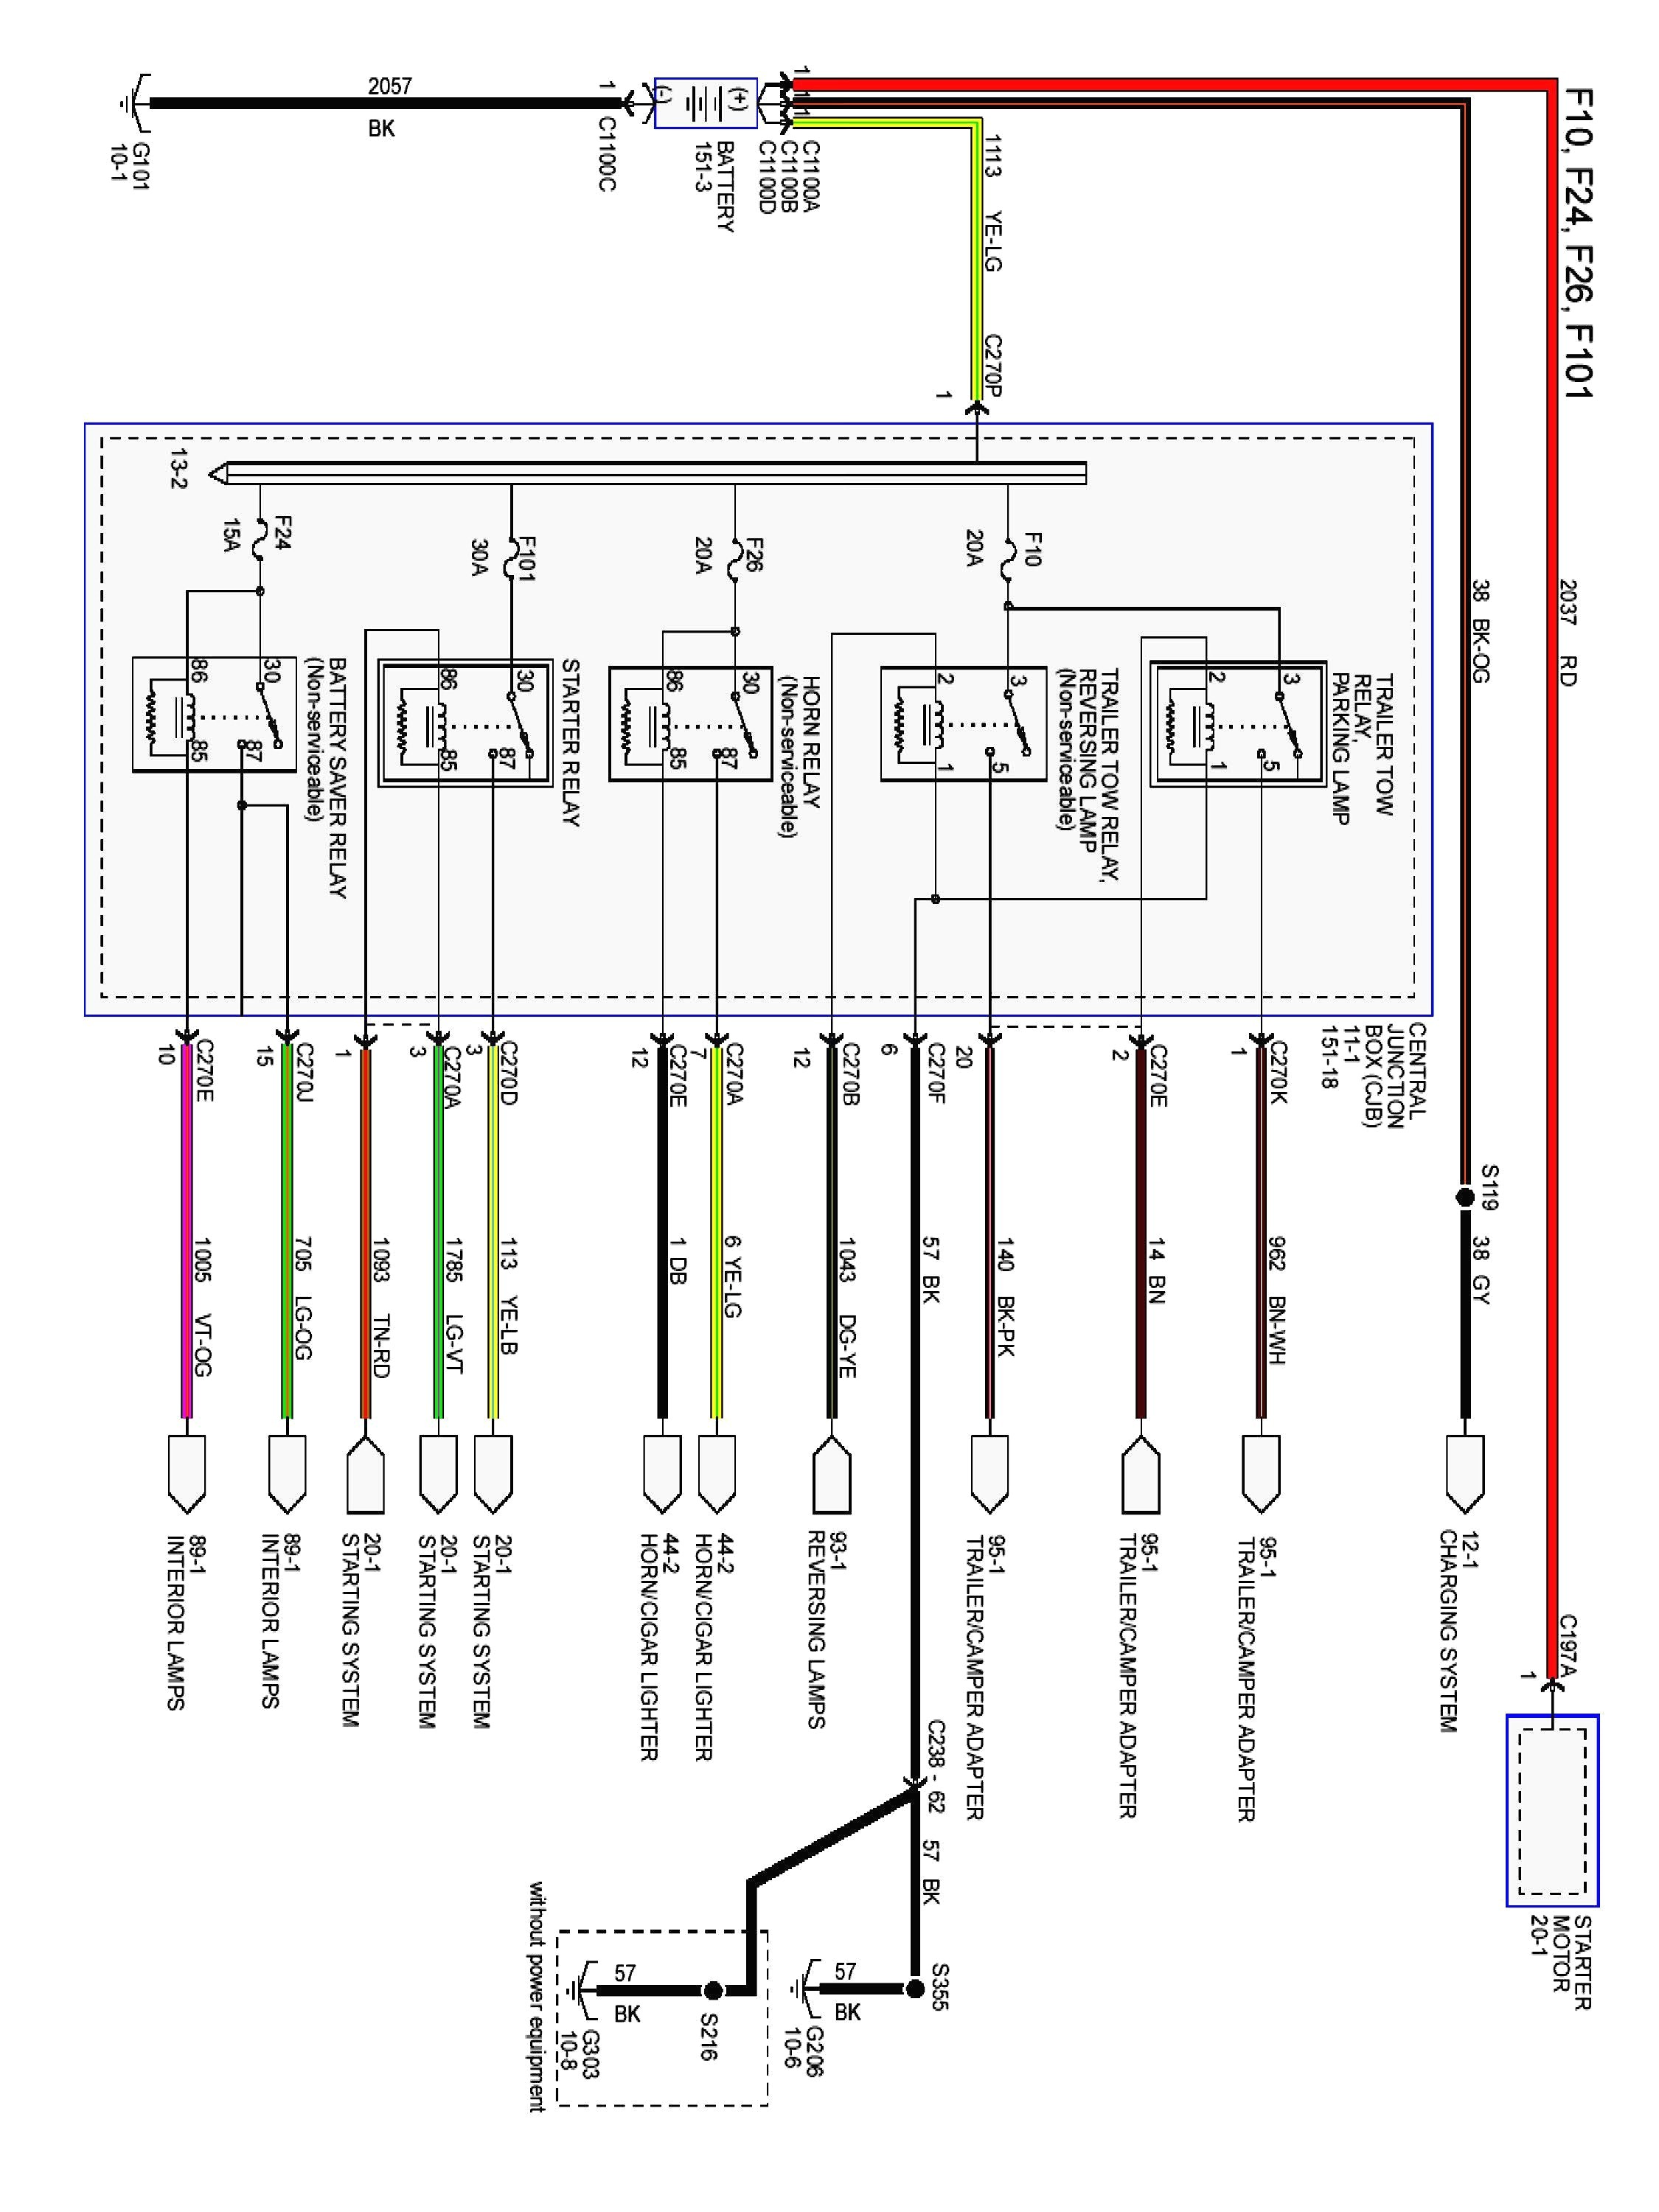 Trailer Light Harness Diagram 2005 ford F 150 Wiring Diagram Wiring Diagram Of Trailer Light Harness Diagram